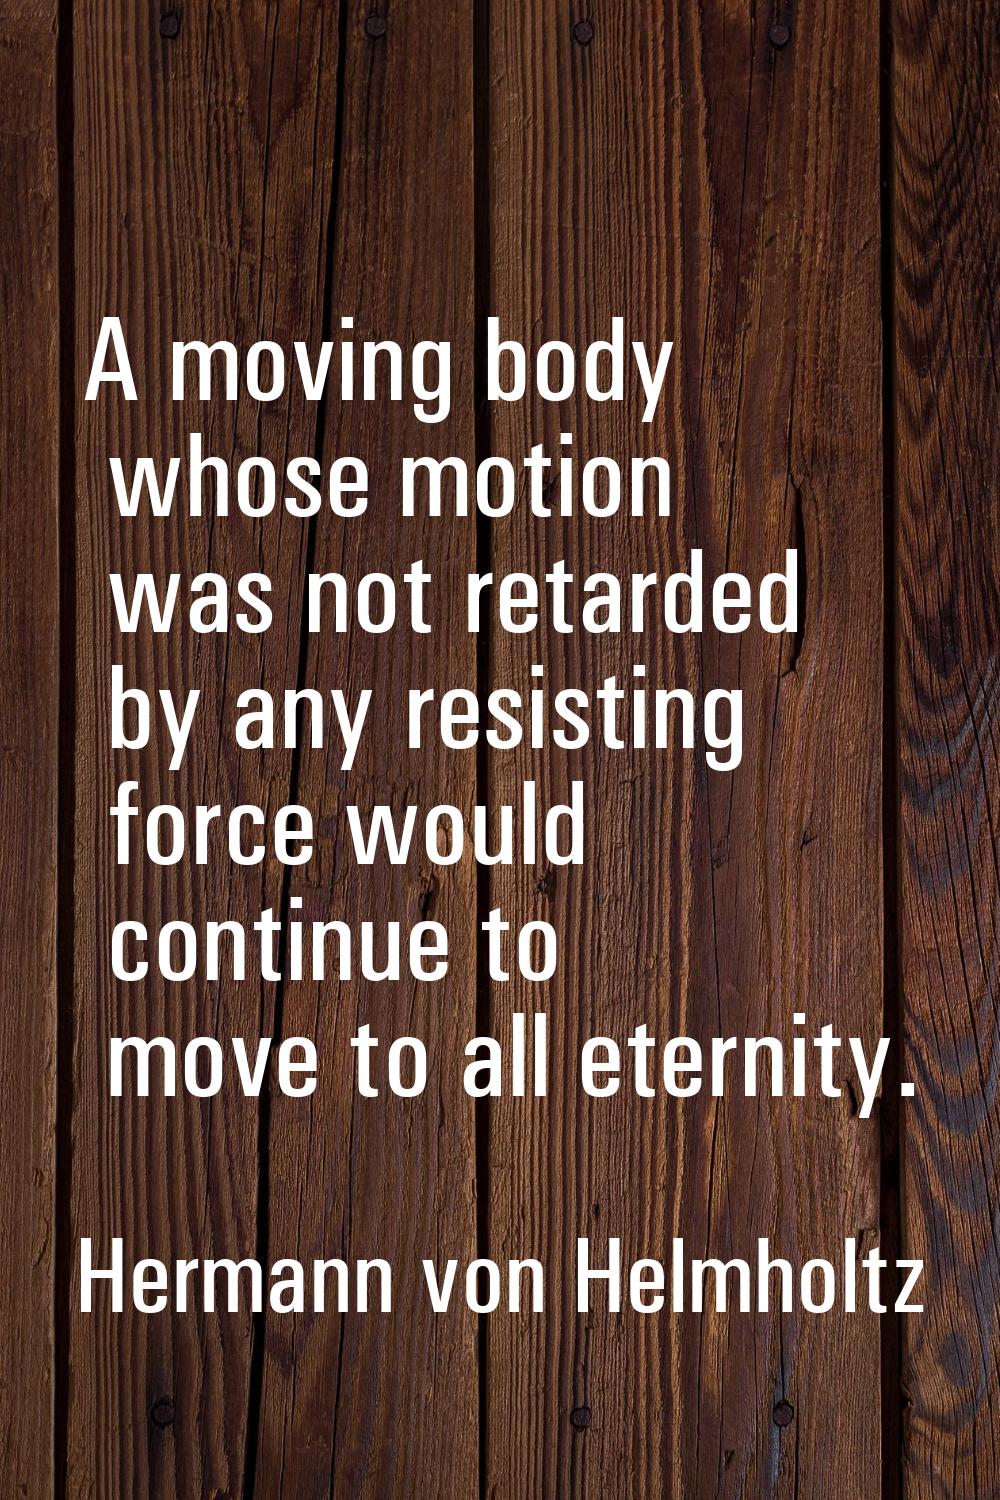 A moving body whose motion was not retarded by any resisting force would continue to move to all et